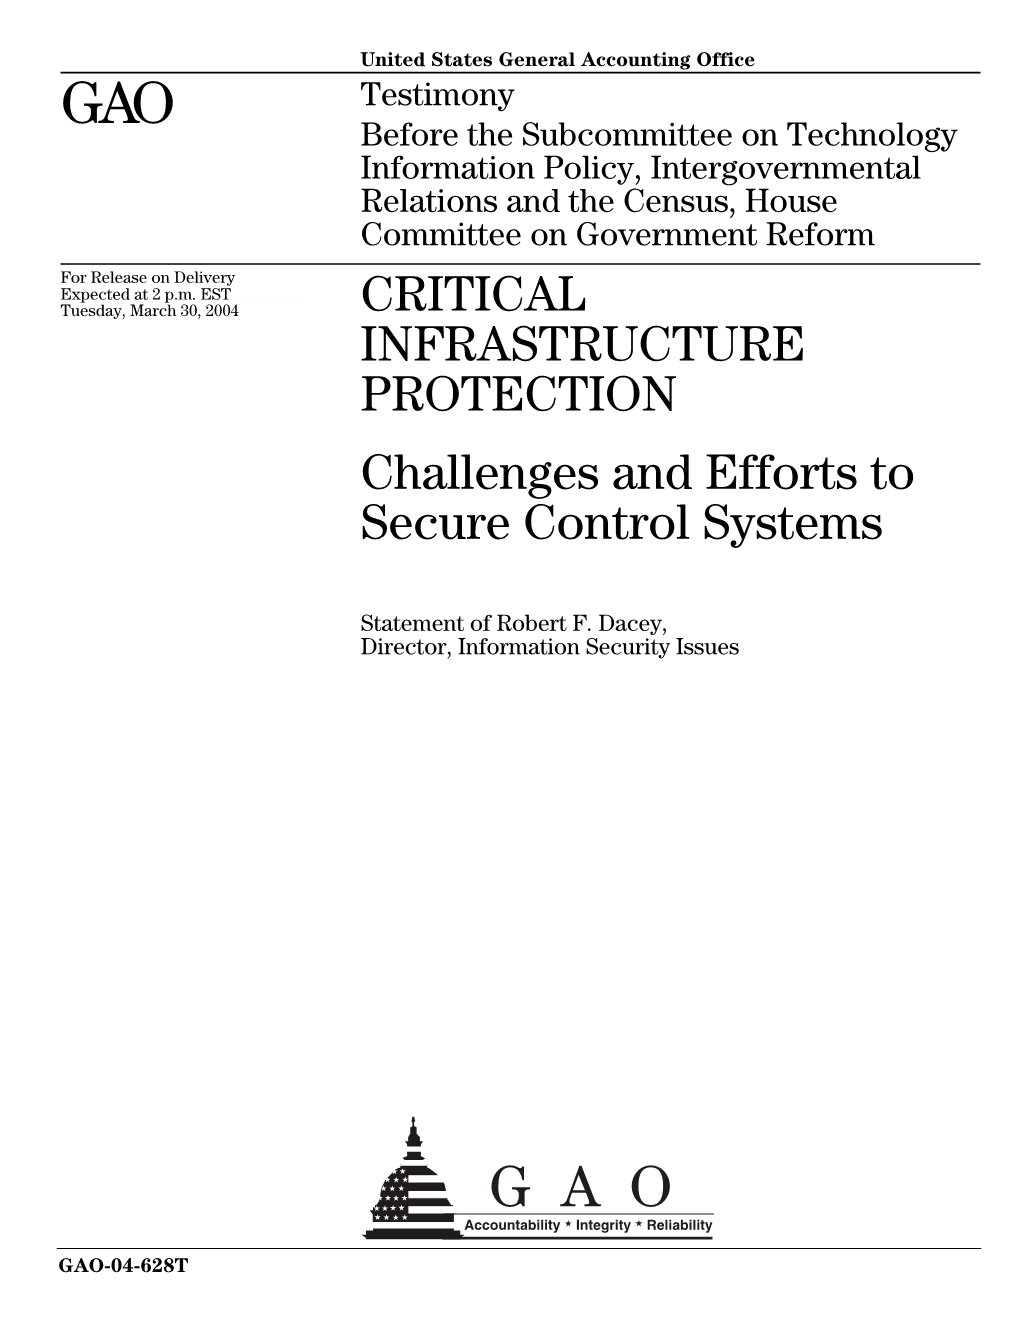 GAO-04-628T Critical Infrastructure Protection: Challenges and Efforts